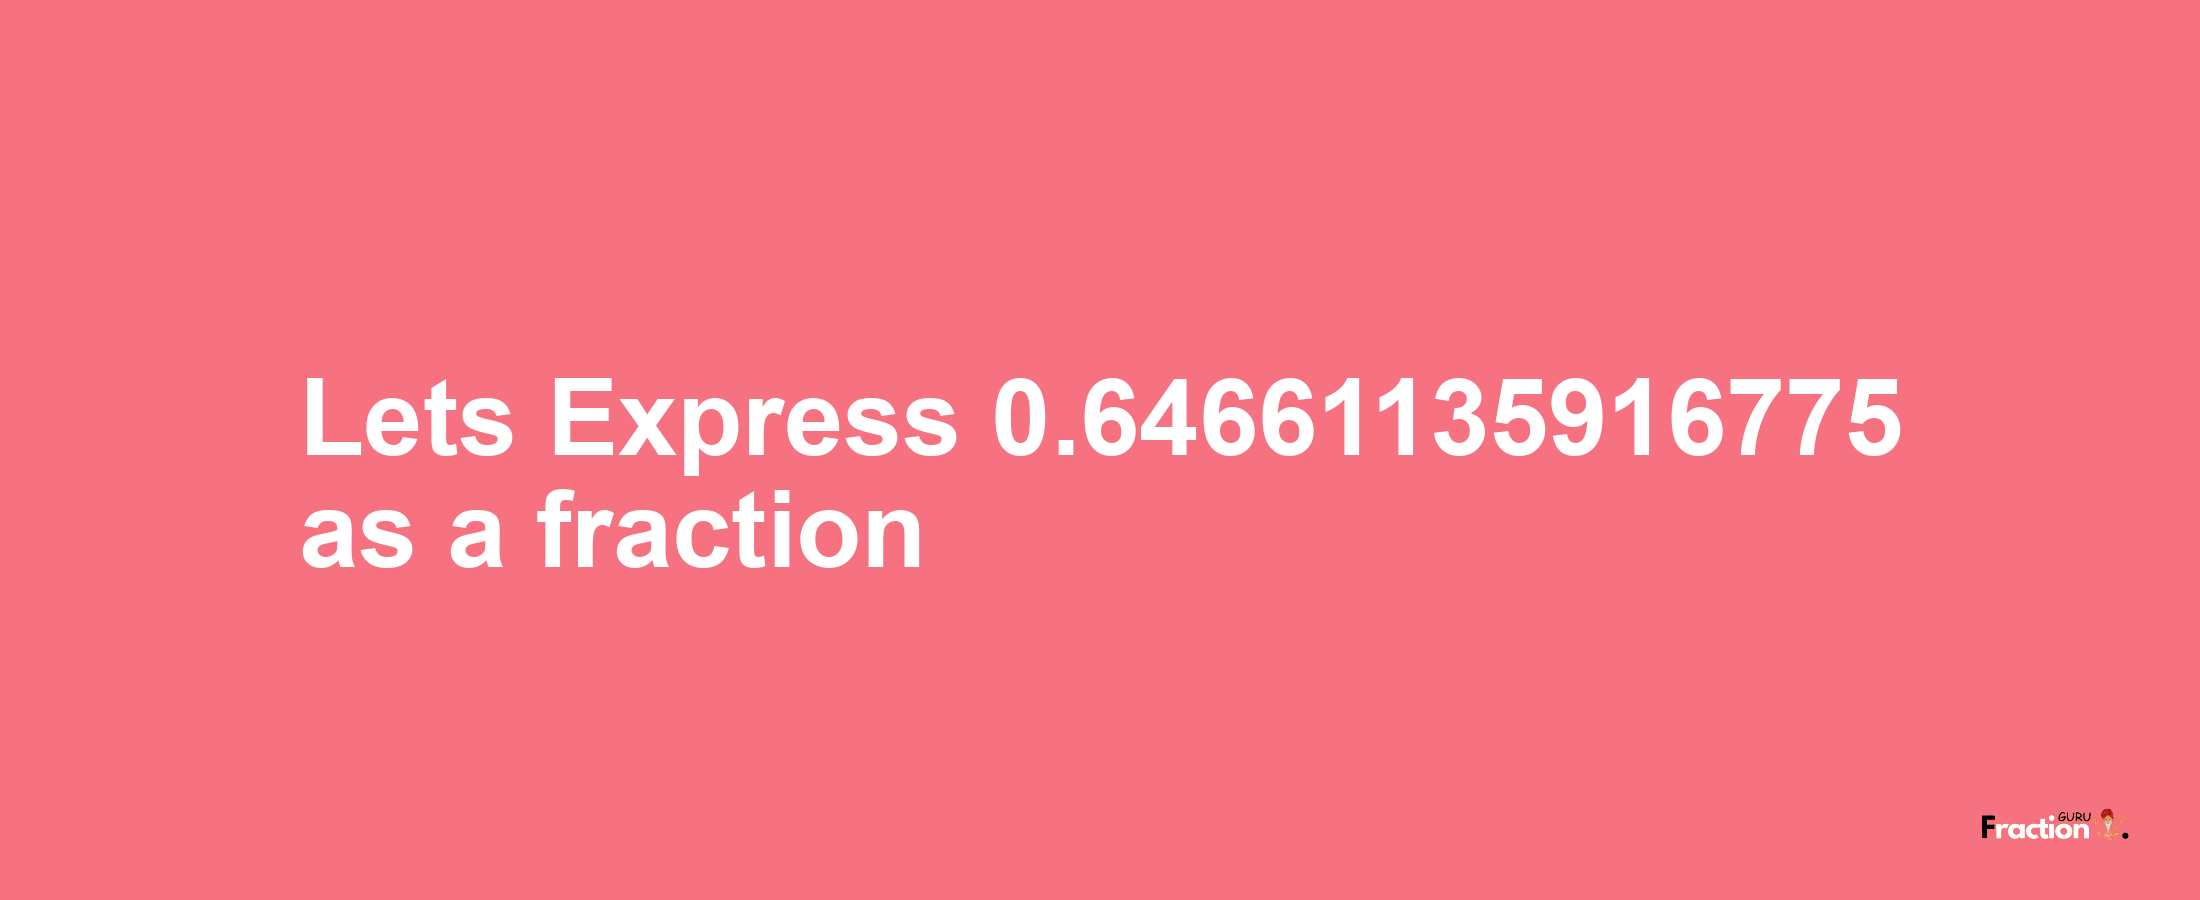 Lets Express 0.64661135916775 as afraction